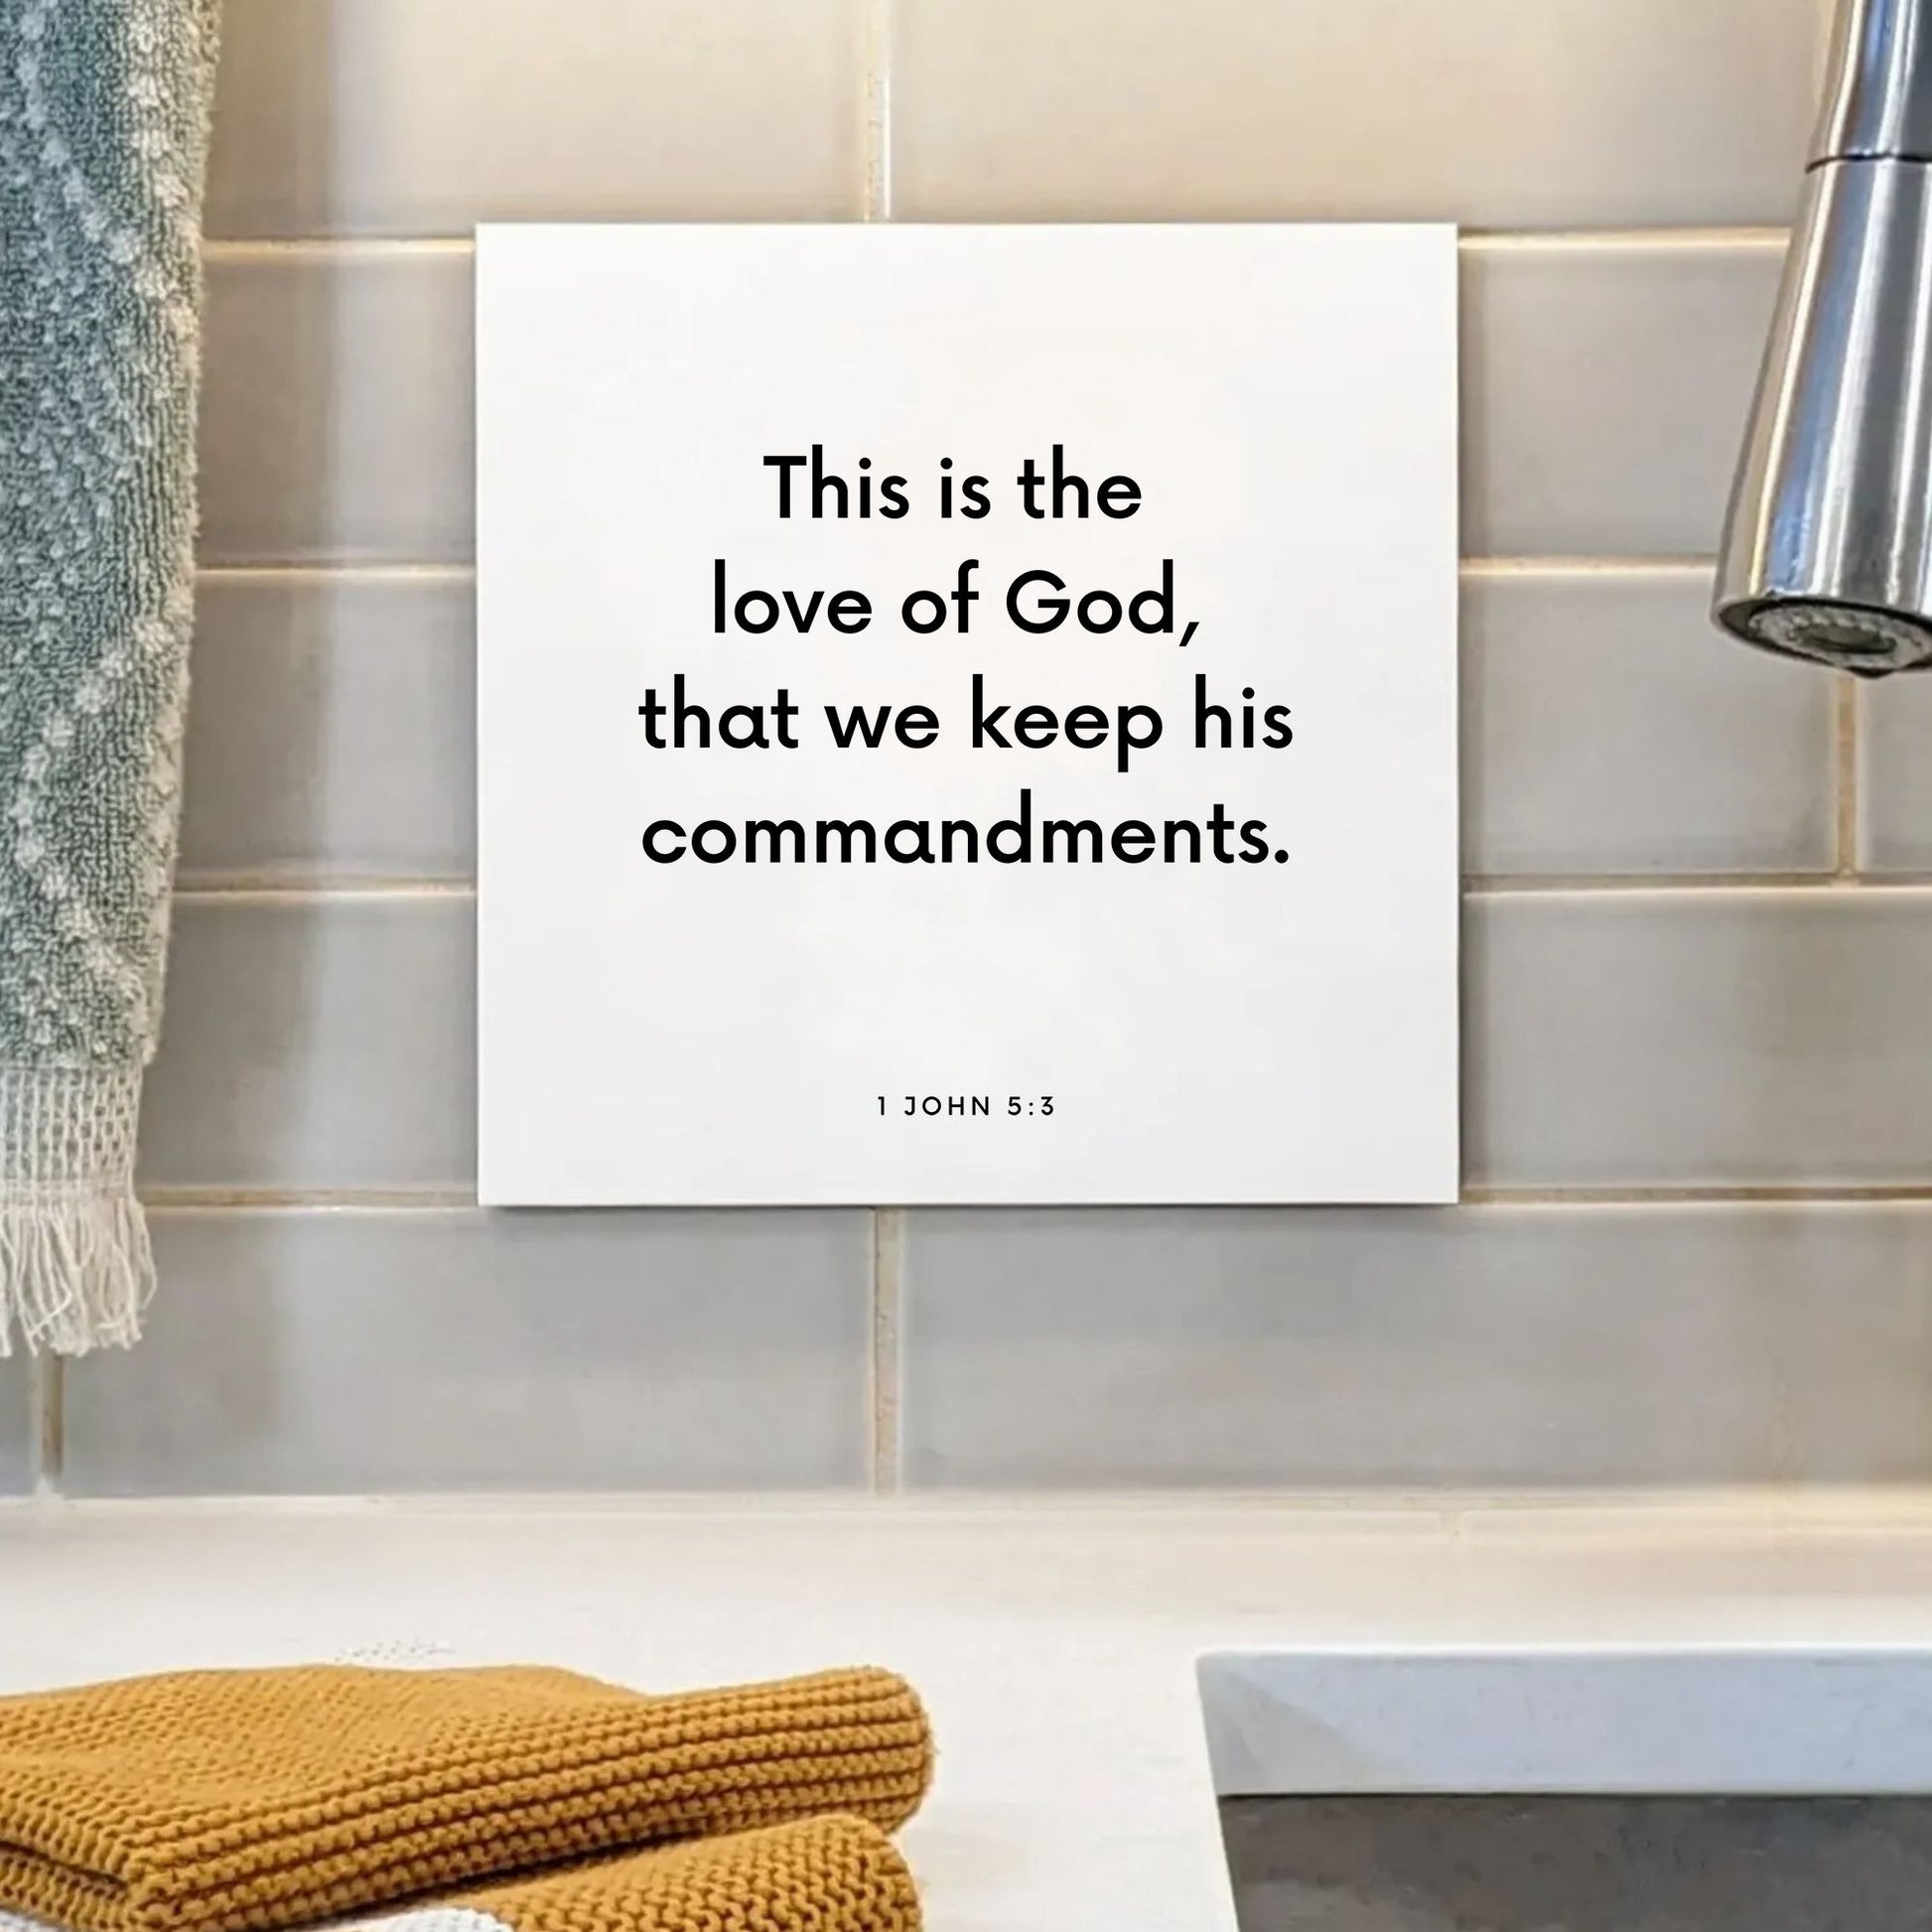 Sink mouting of the scripture tile for 1 John 5:3 - "This is the love of God, that we keep his commandments"